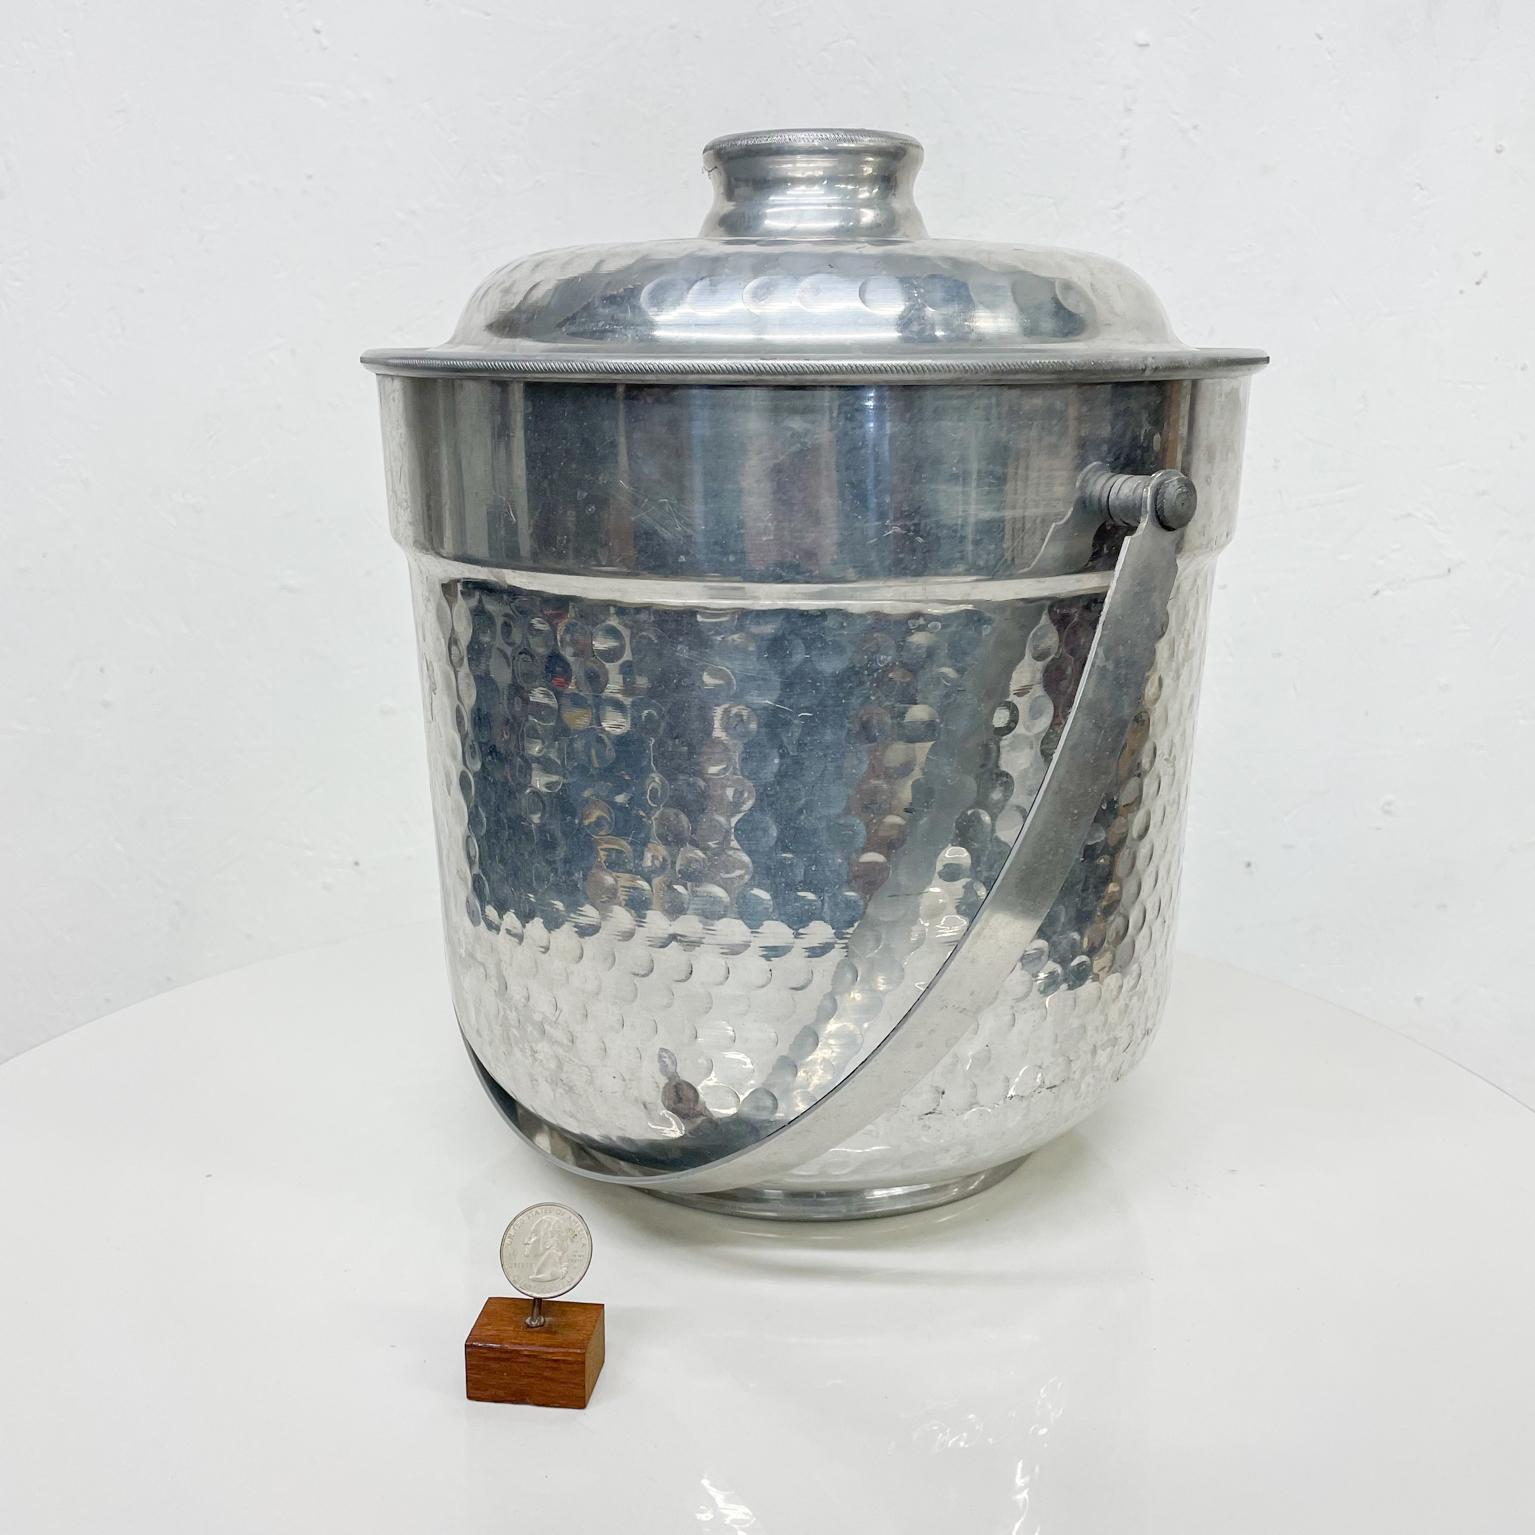 Ice bucket
Rare size XL ice bucket made in Italy. Hand forged hammered aluminum. 
Measures 18 H handle with handle 12.75 height w/o handle x 11 diameter x 12.5 wide
Stamped underneath Italy
Original preowned unrestored condition. Wear present.